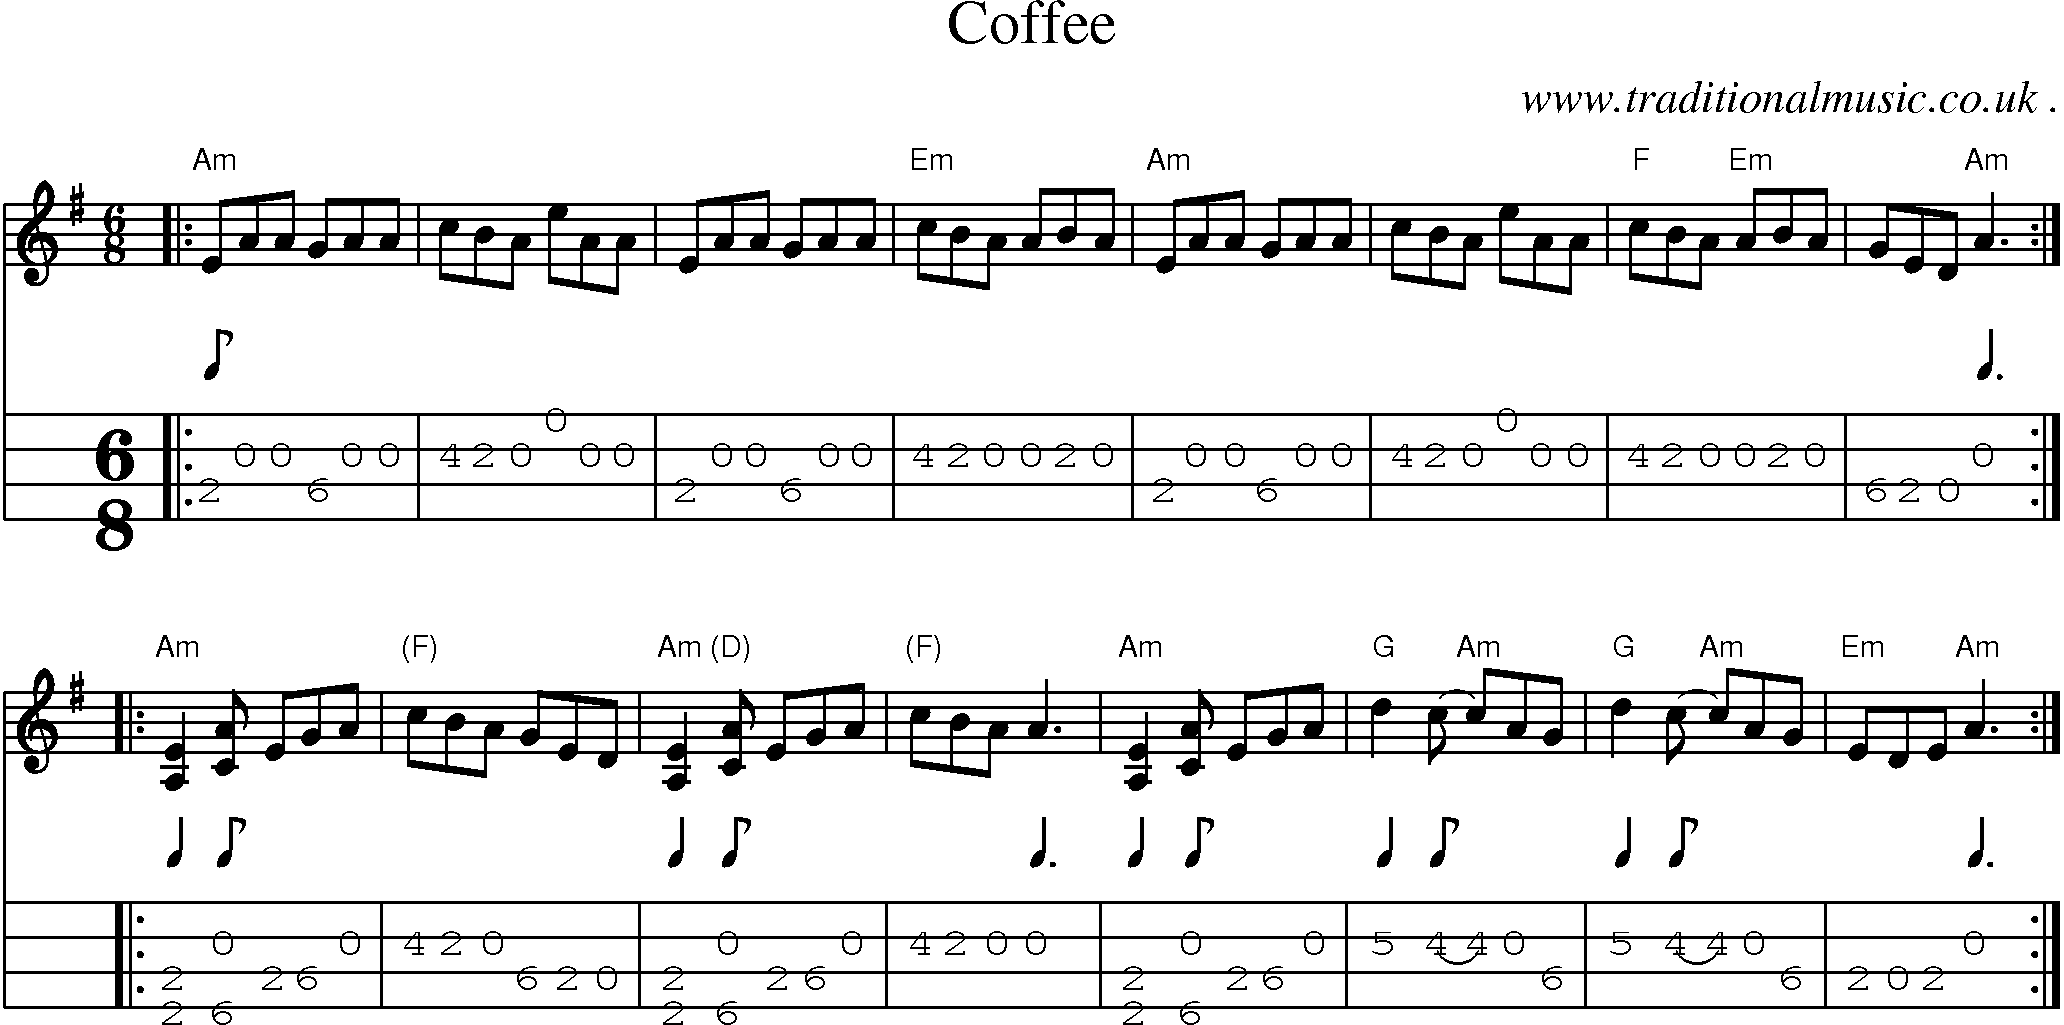 Sheet-music  score, Chords and Mandolin Tabs for Coffee